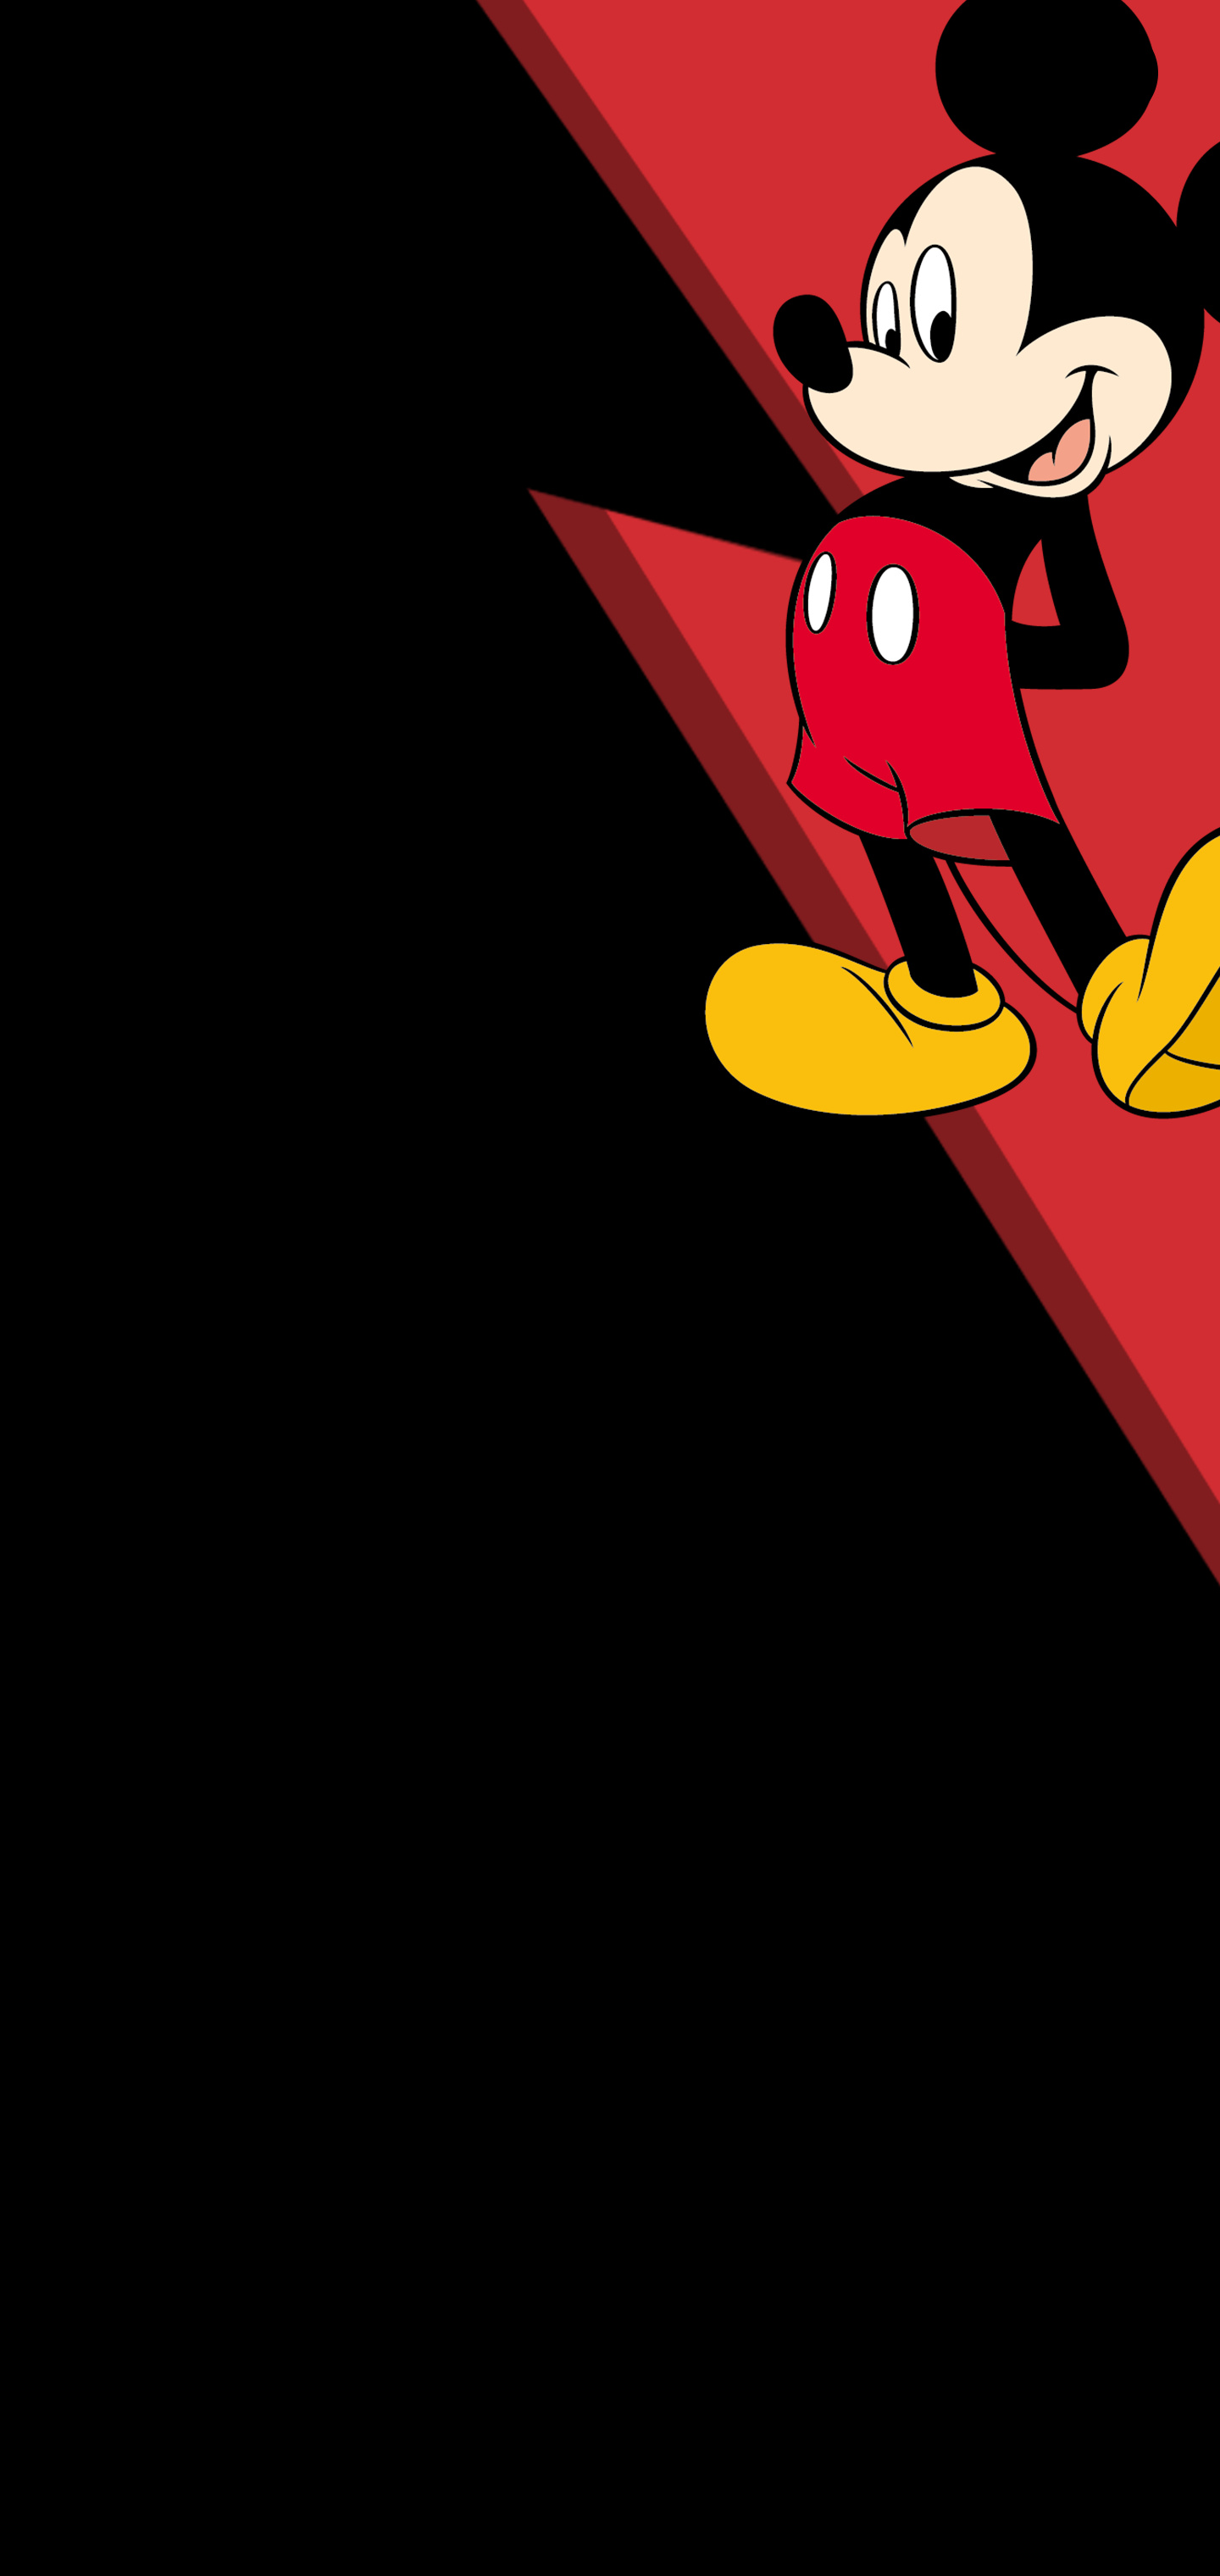 Mickey Mouse in AMOLED, Rich colors, Satisfying wallpapers, 1440x3040 HD Phone